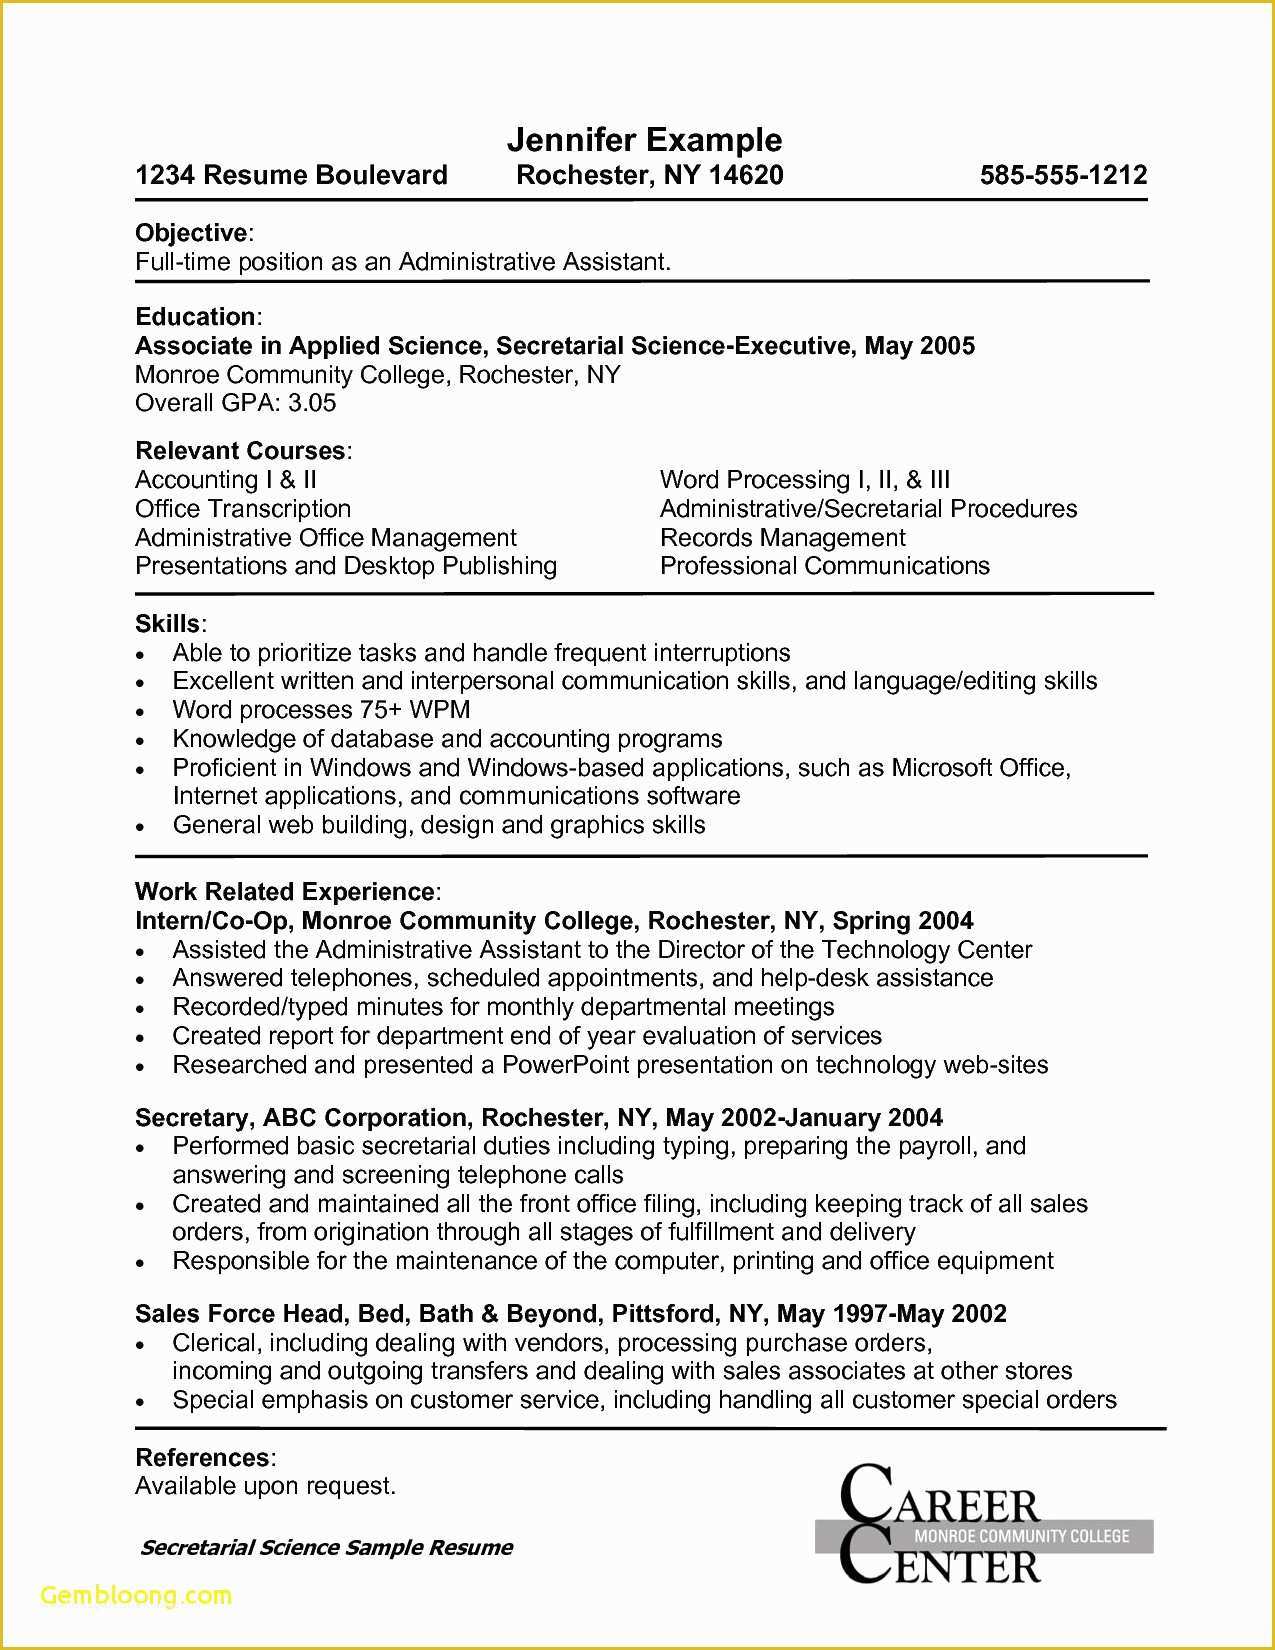 ats-resume-template-free-download-of-executive-assistant-resume-samples